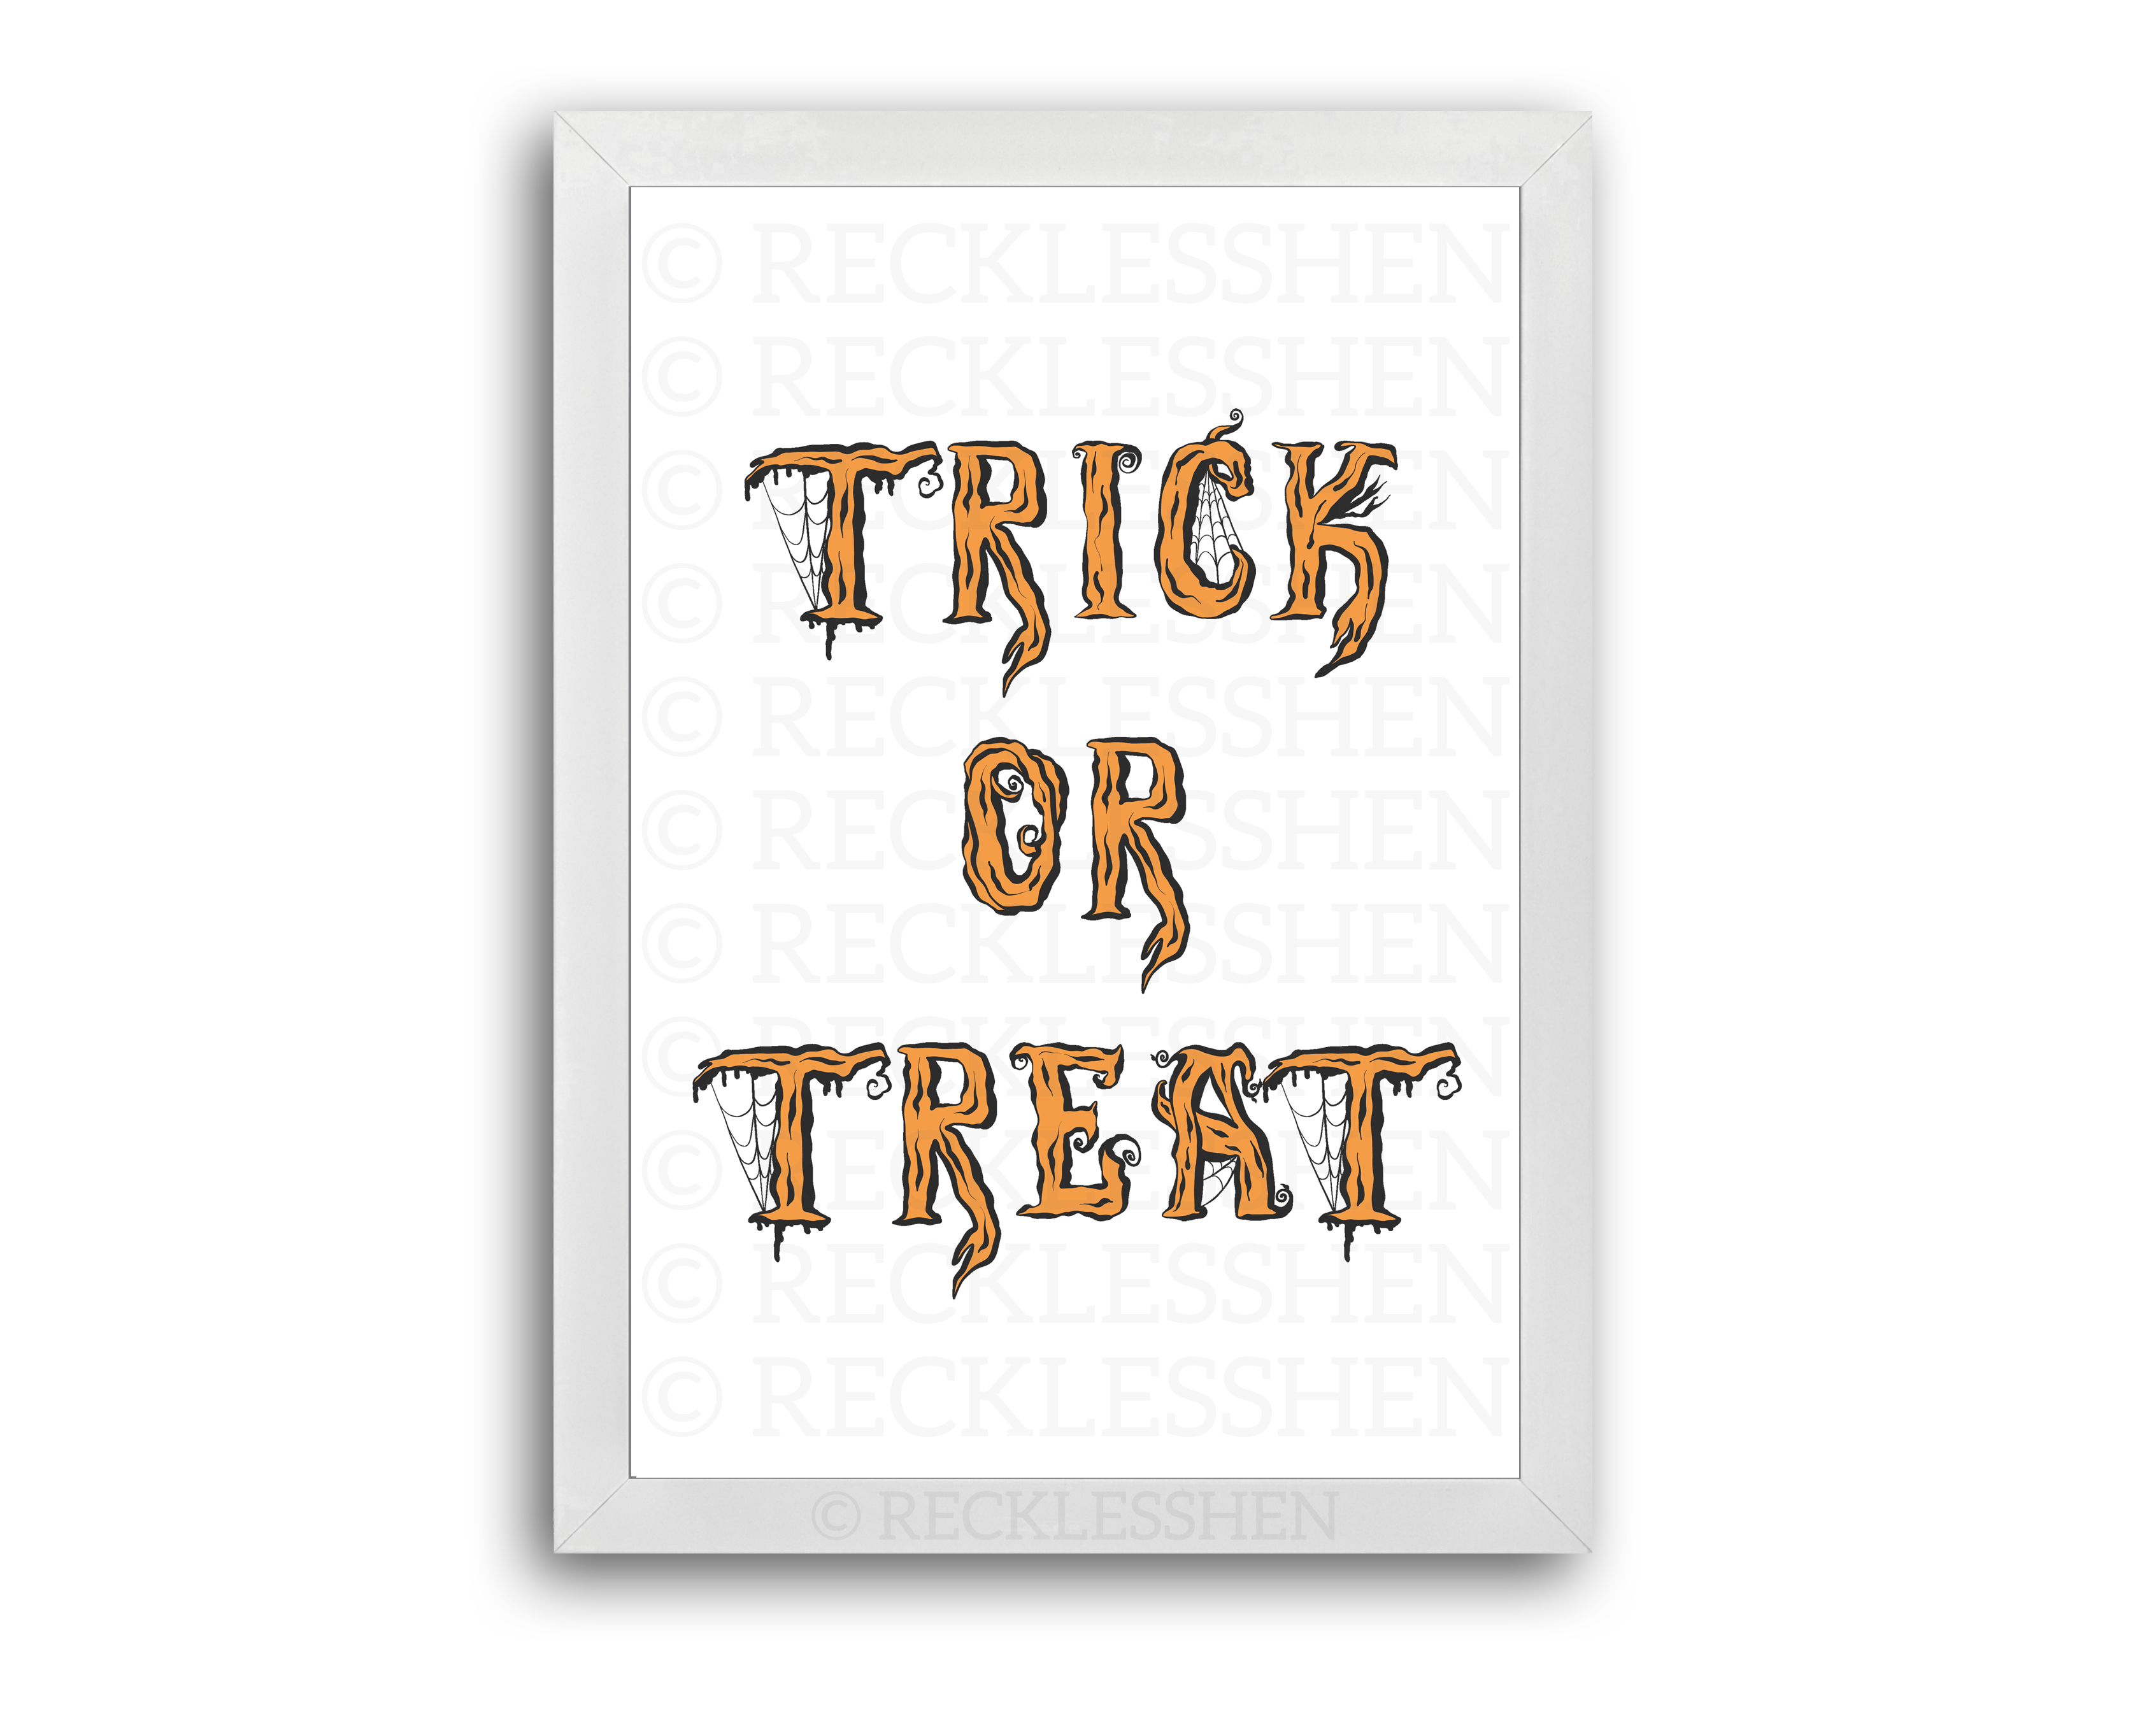 Trick or Treat A4 RecklessHen Print - 